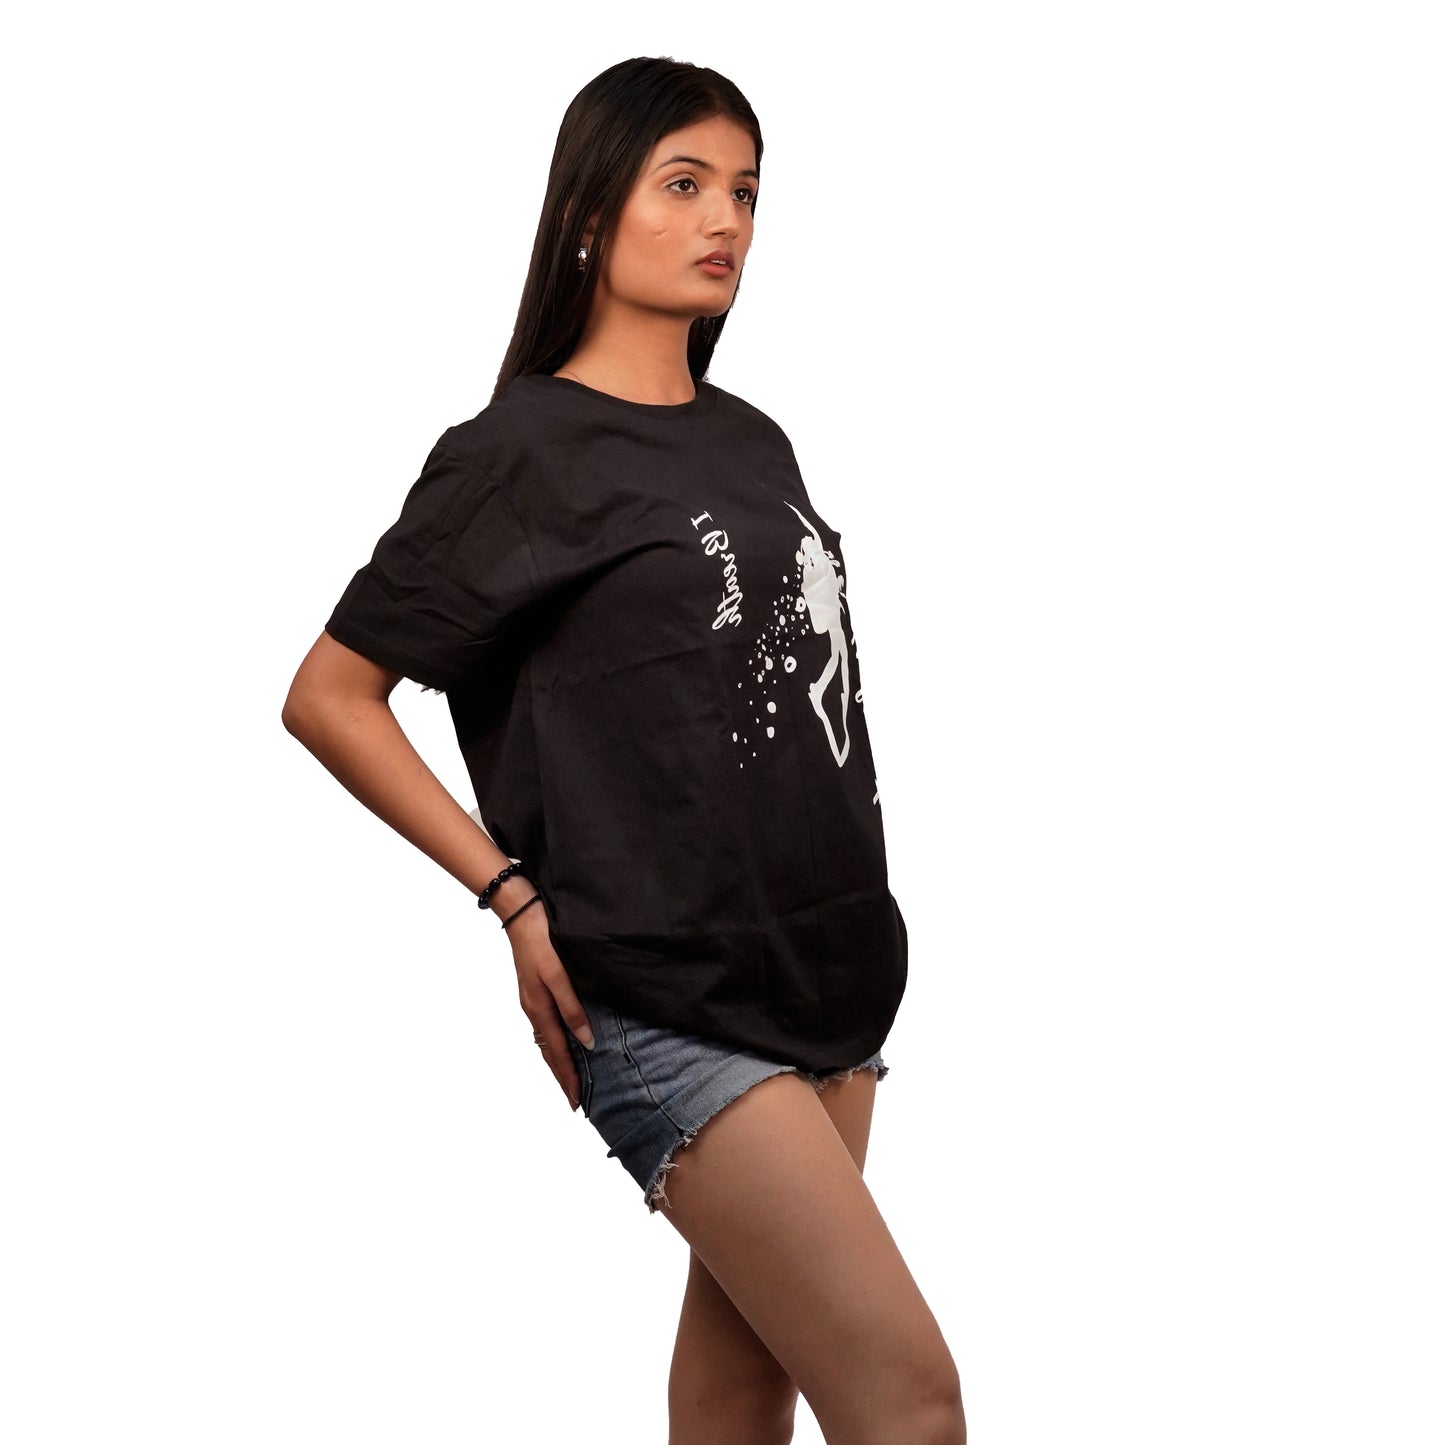 I Breather Under Water T-shirt In Black Color For Women